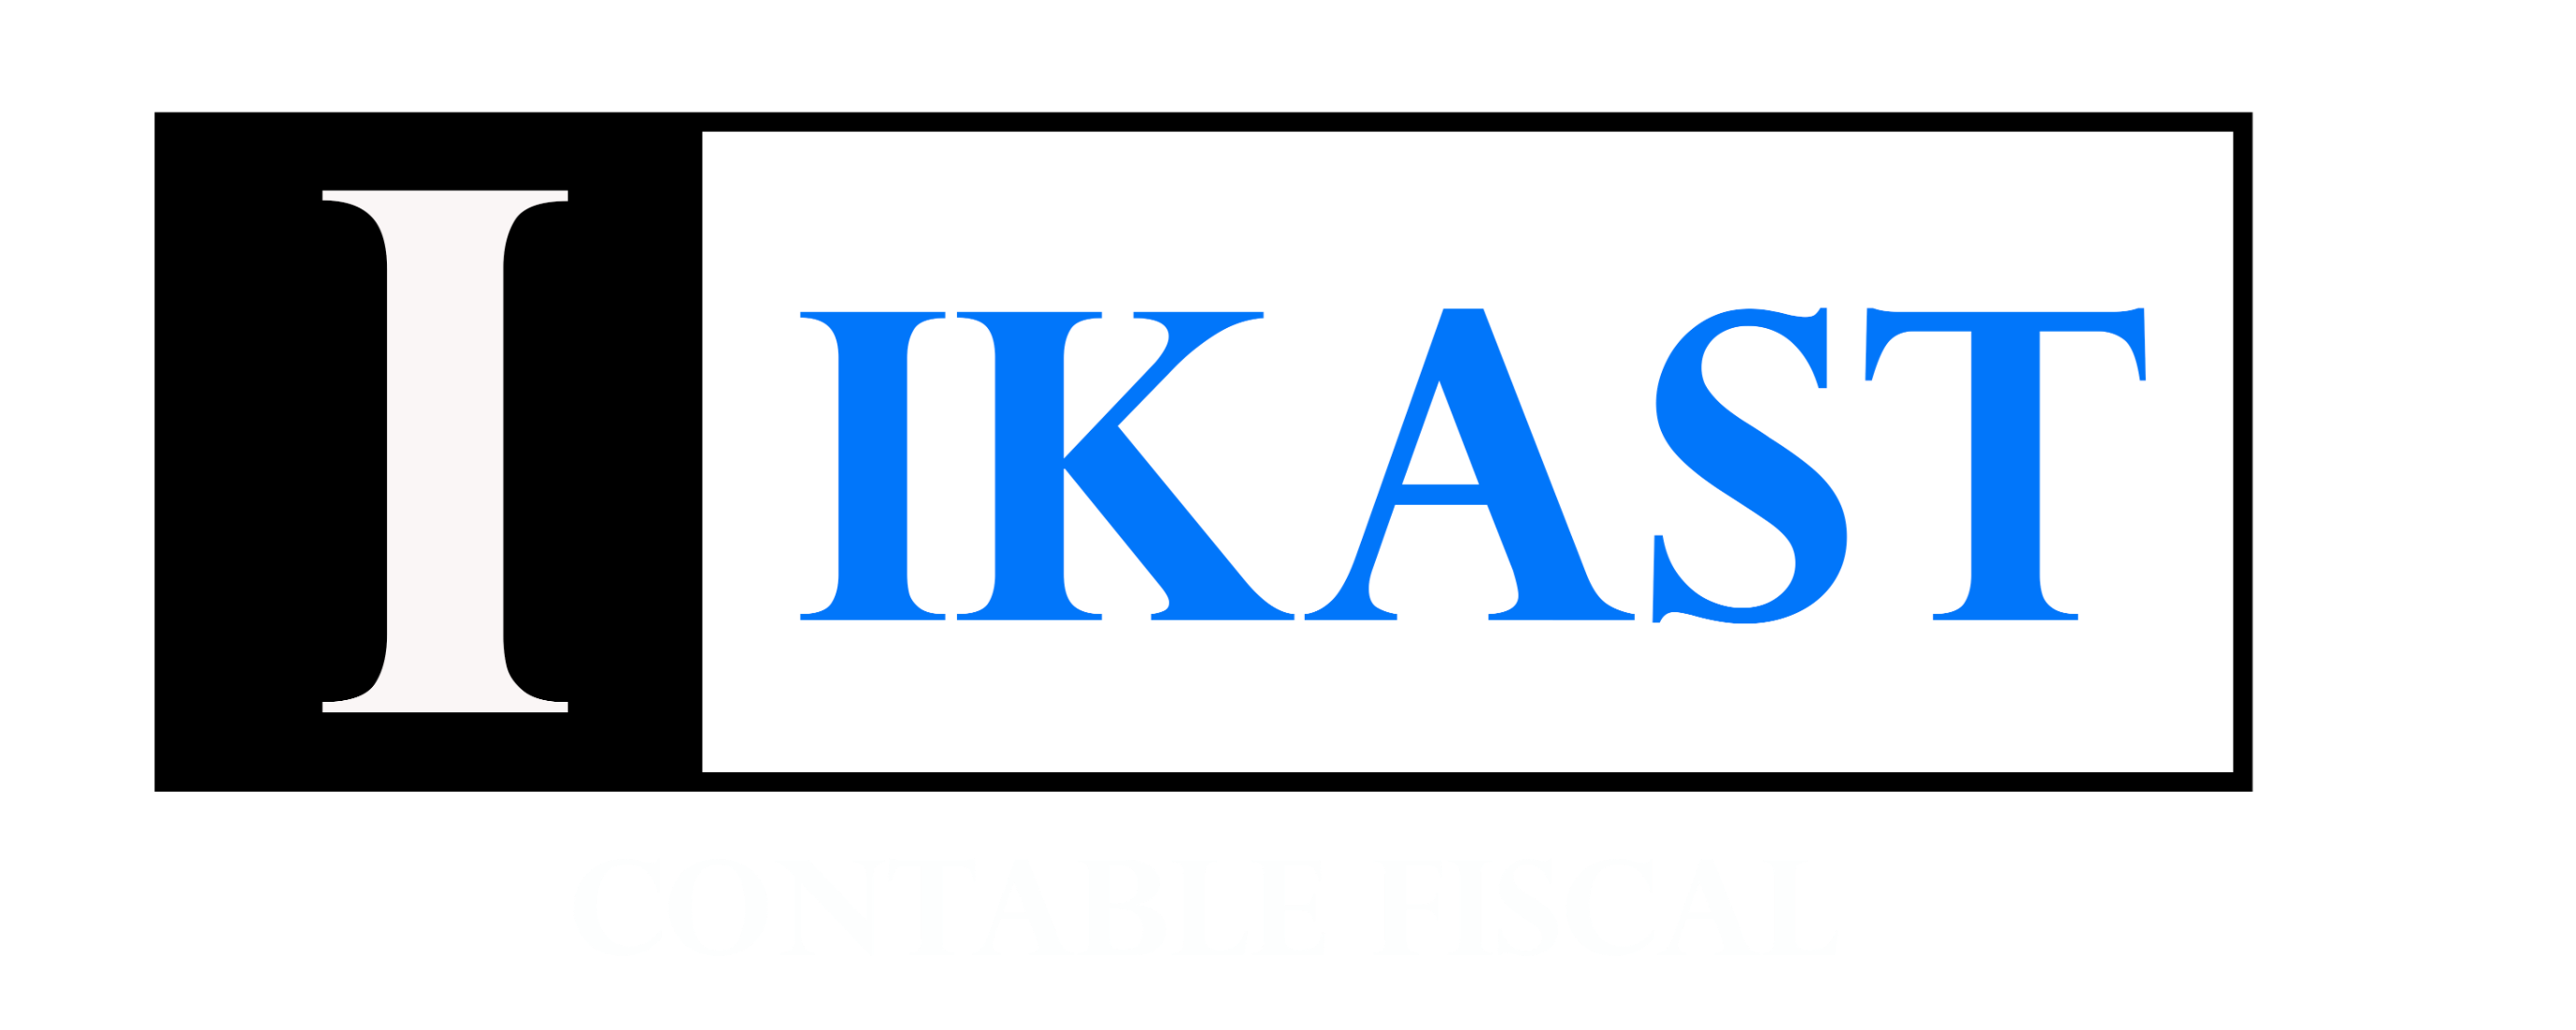 IKAST Contable Fiscal Logo